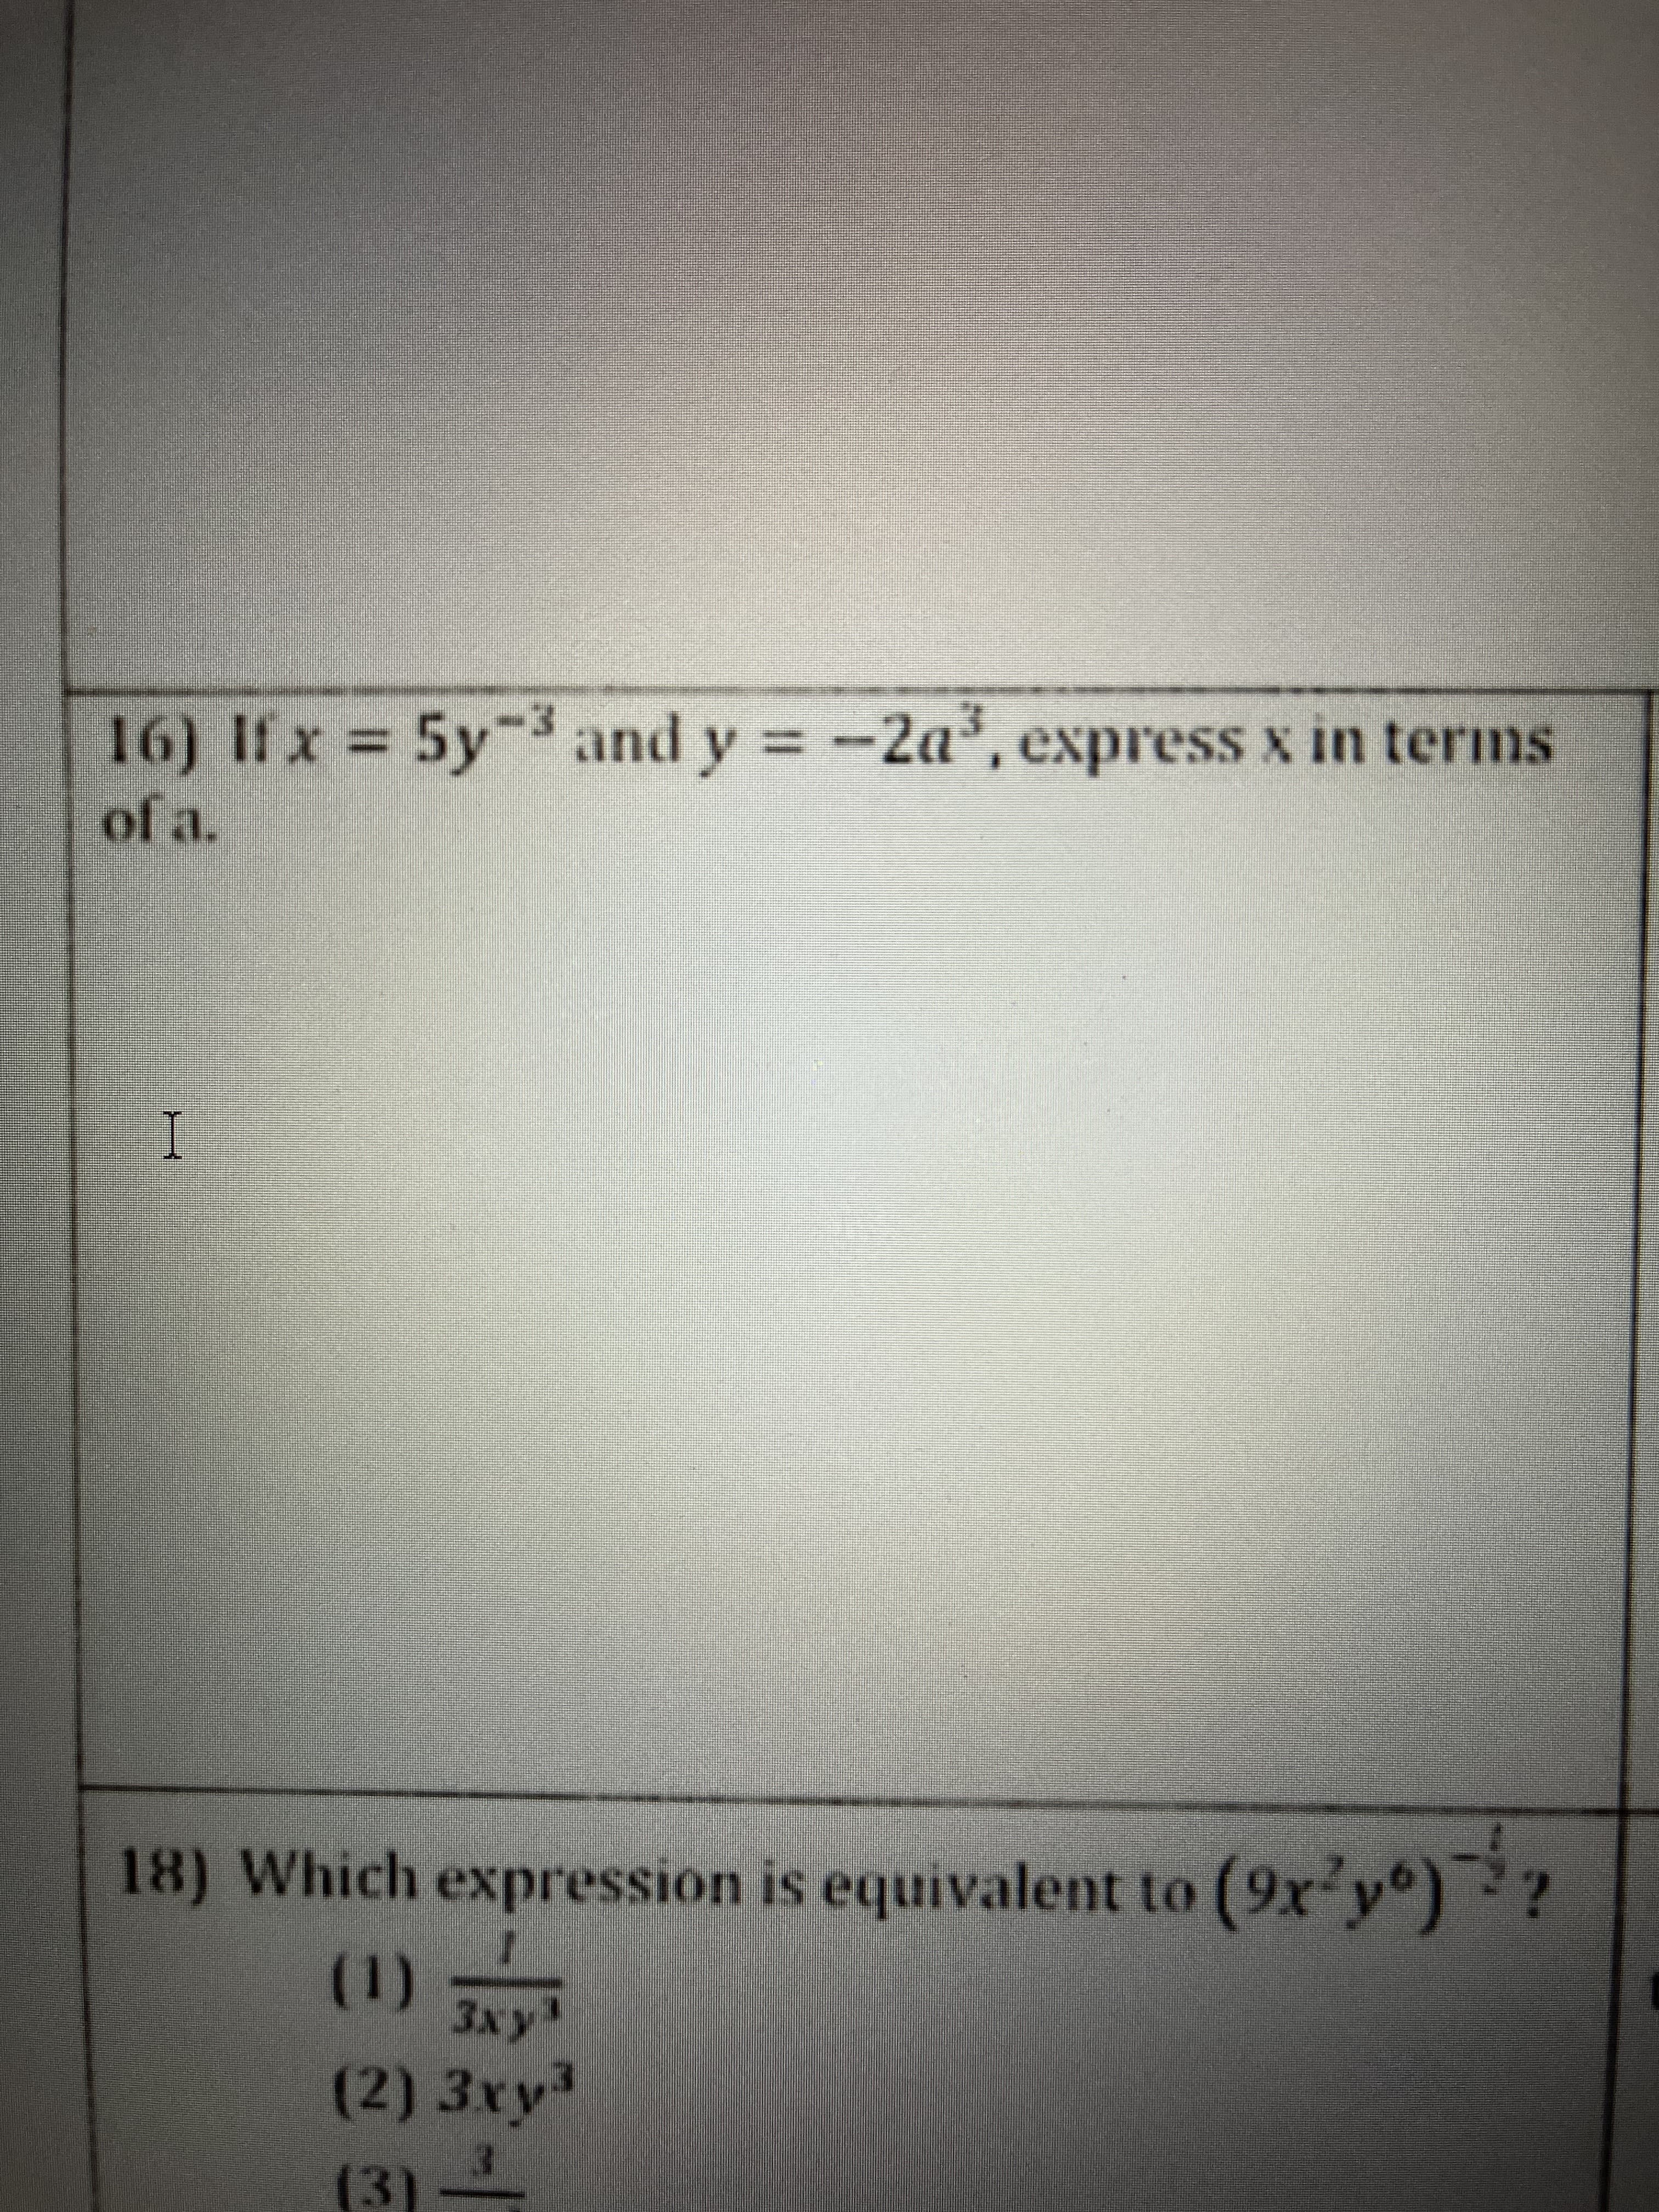 16) If x = 5y and y -2a, express x in terms
of a.
%3D
18) Which expression is equivalent to (9x y°
(1)
(2)3xy³
(3)-
